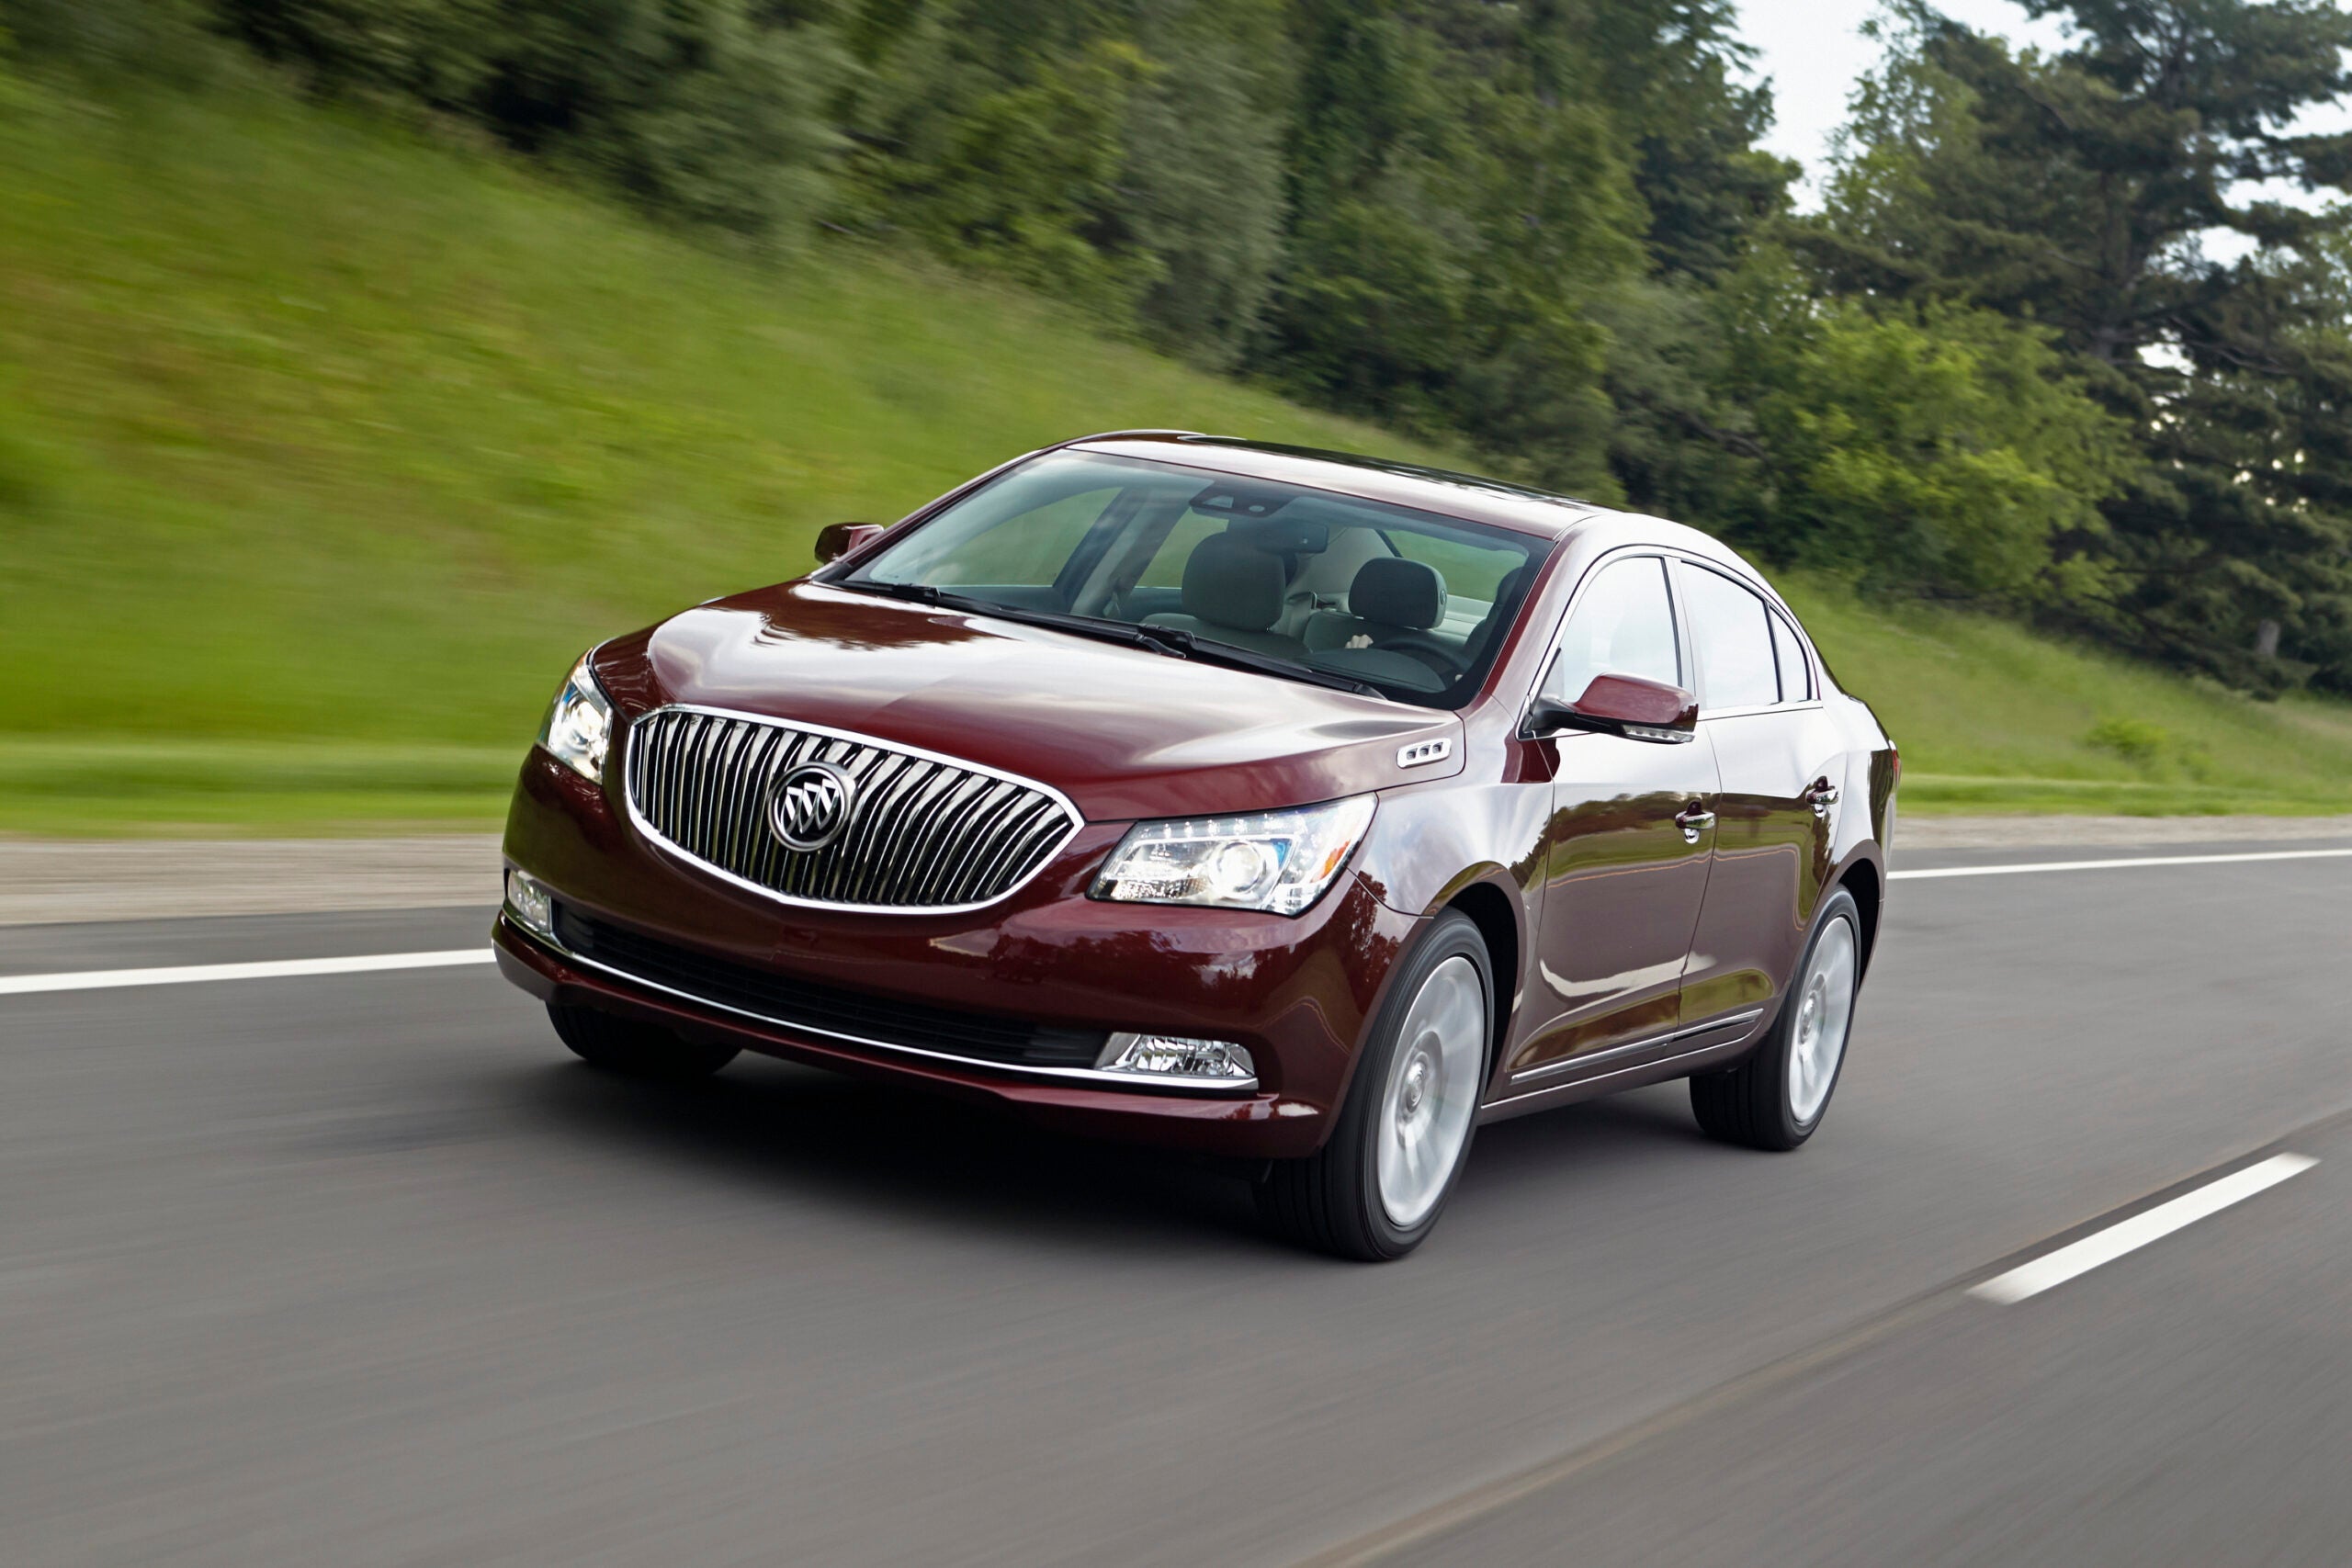 The 2016 Buick LaCrosse.